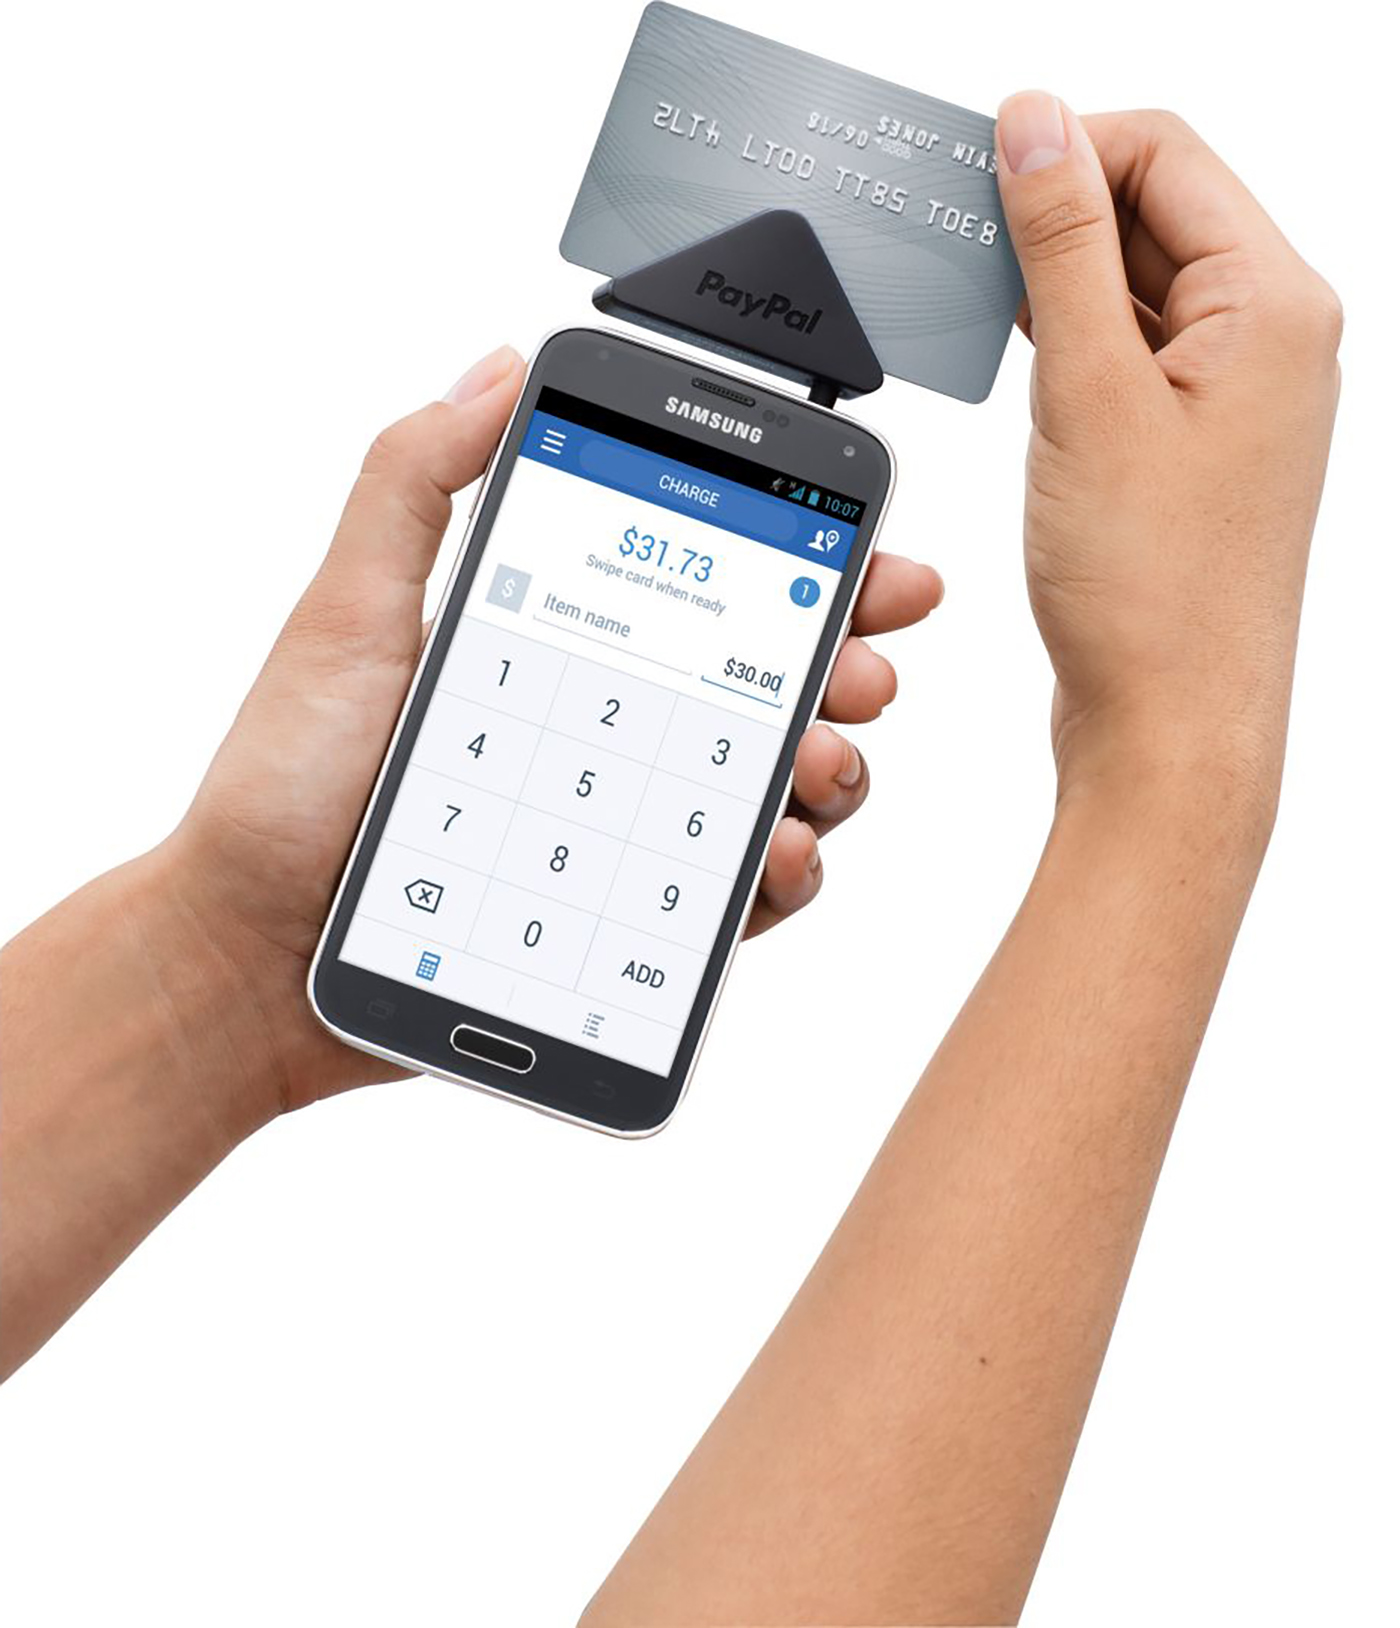 Paypal Here  paypal card reader credit card Debit card iphone mobile phone payment